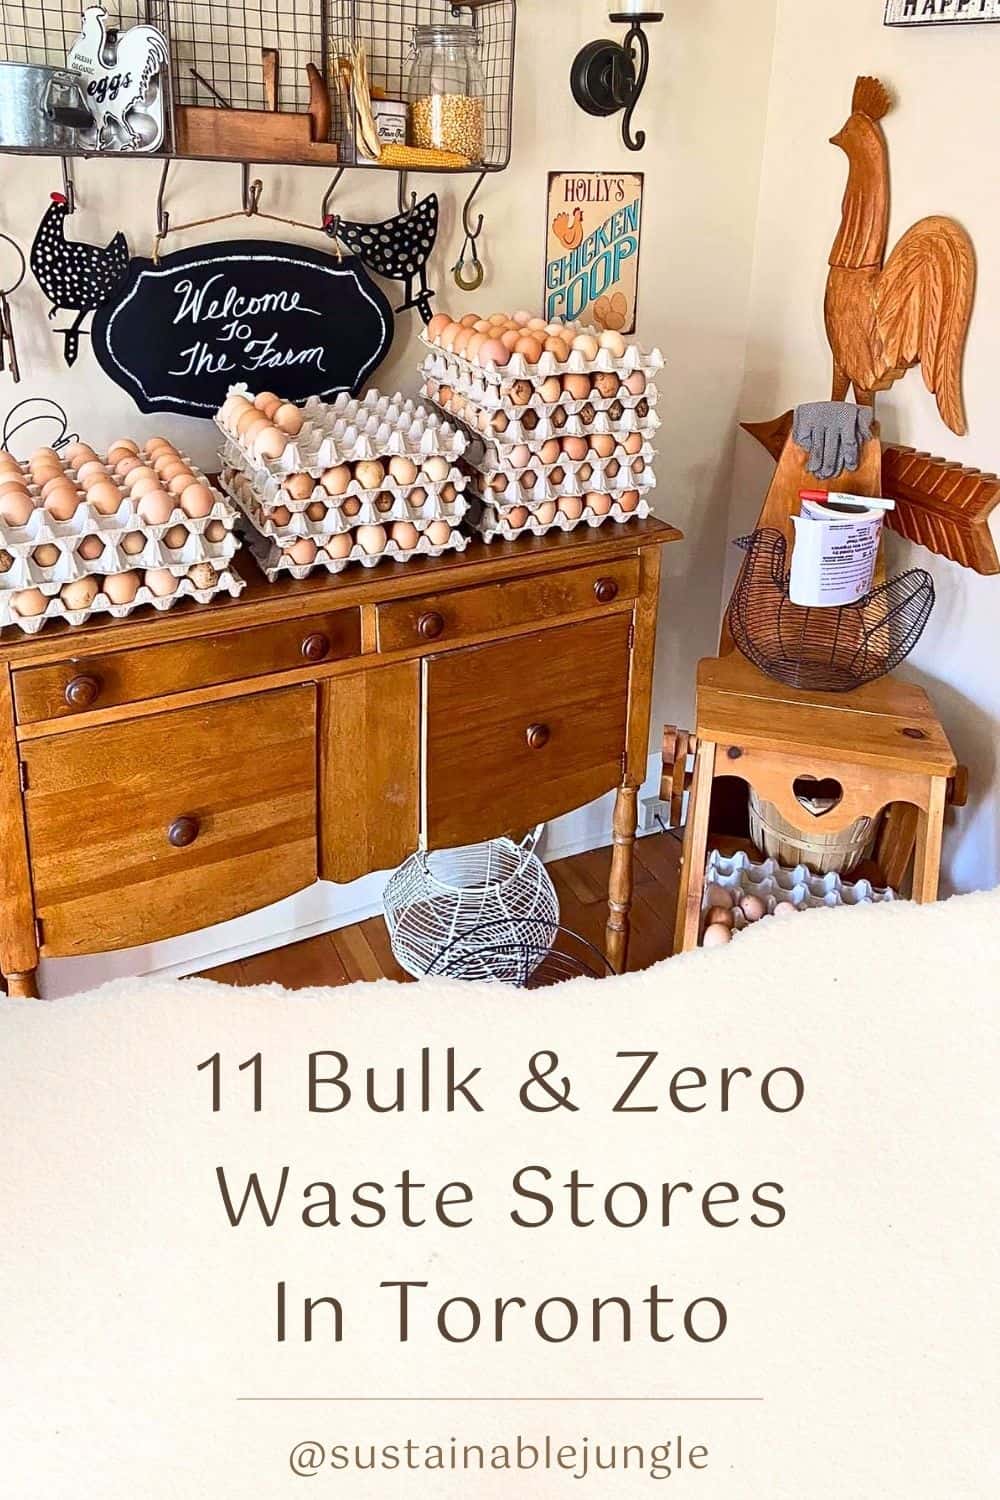 11 Bulk & Zero Waste Stores In Toronto For A More Sustainable 6ix Image by Karma Co-op #zerowastestoreToronto #bestzerowastestoresToronto #bulkstoresToronto #refillstoreToronto #zerowasteshopping #sustainablejungle